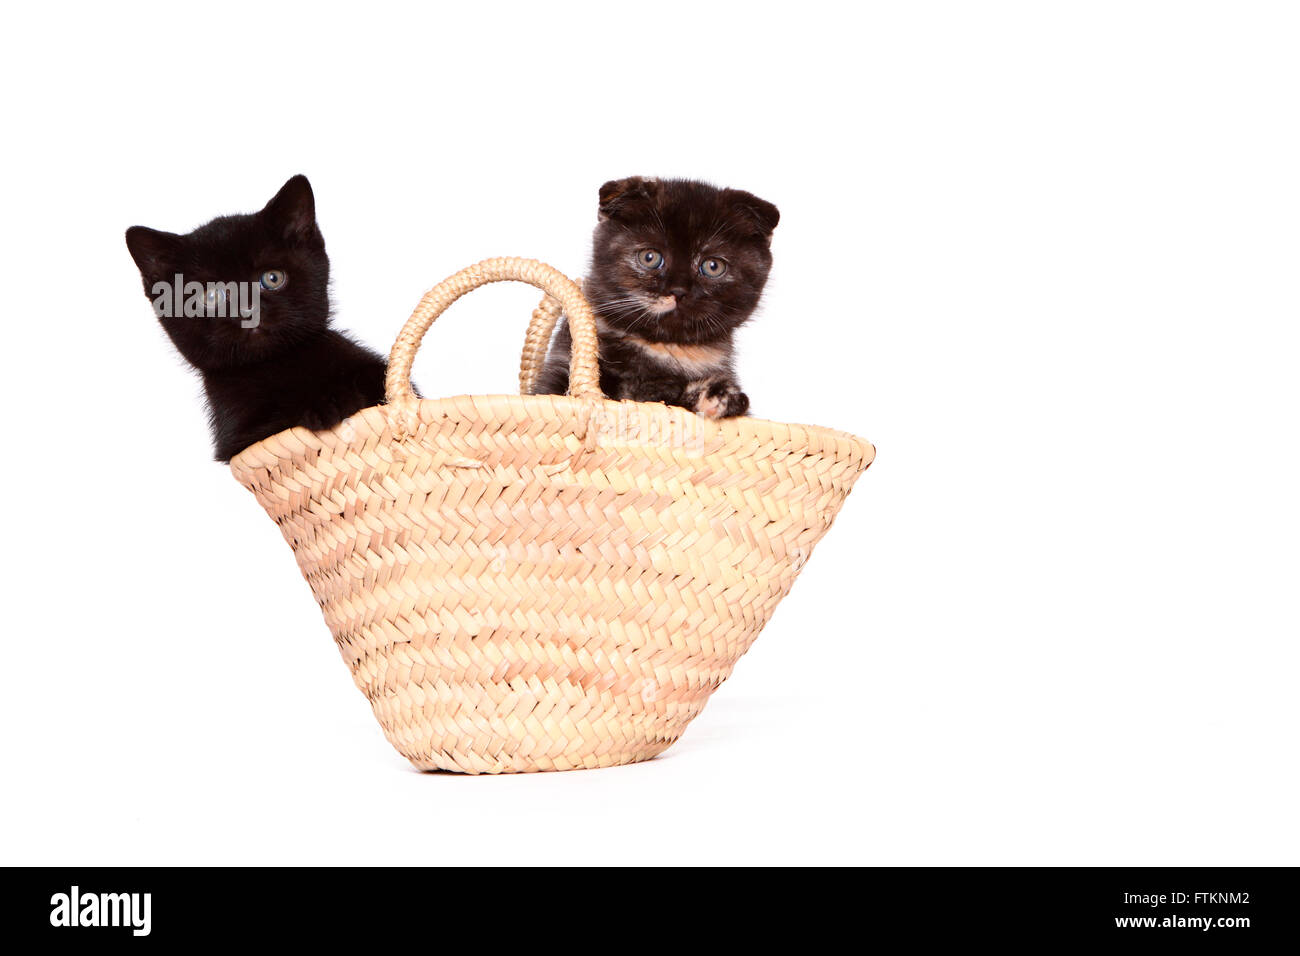 Scottish Fold and British Shorthair. Two kittens (6 weeks old) in a shopping bag. Studio picture against a white background. Germany Stock Photo